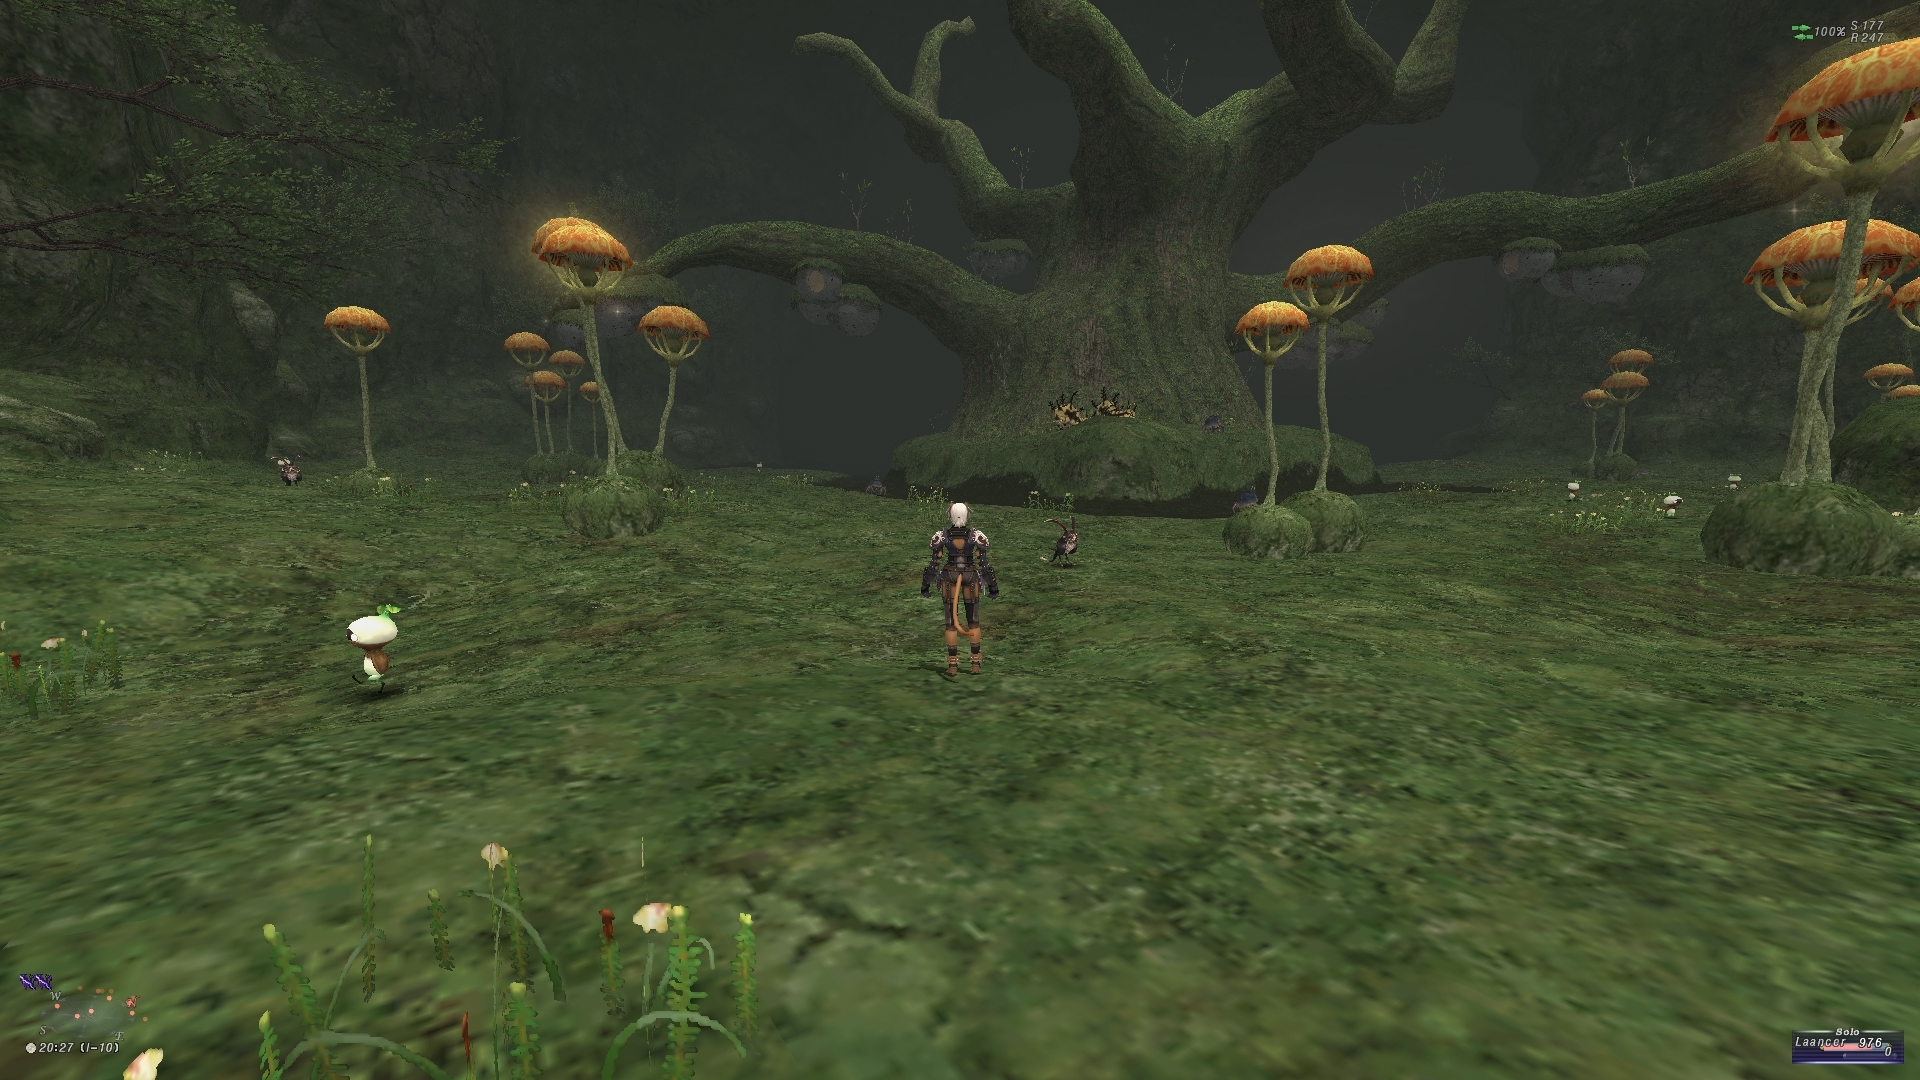 videogame avatar stands with back to camera in front of large trees and mushrooms.